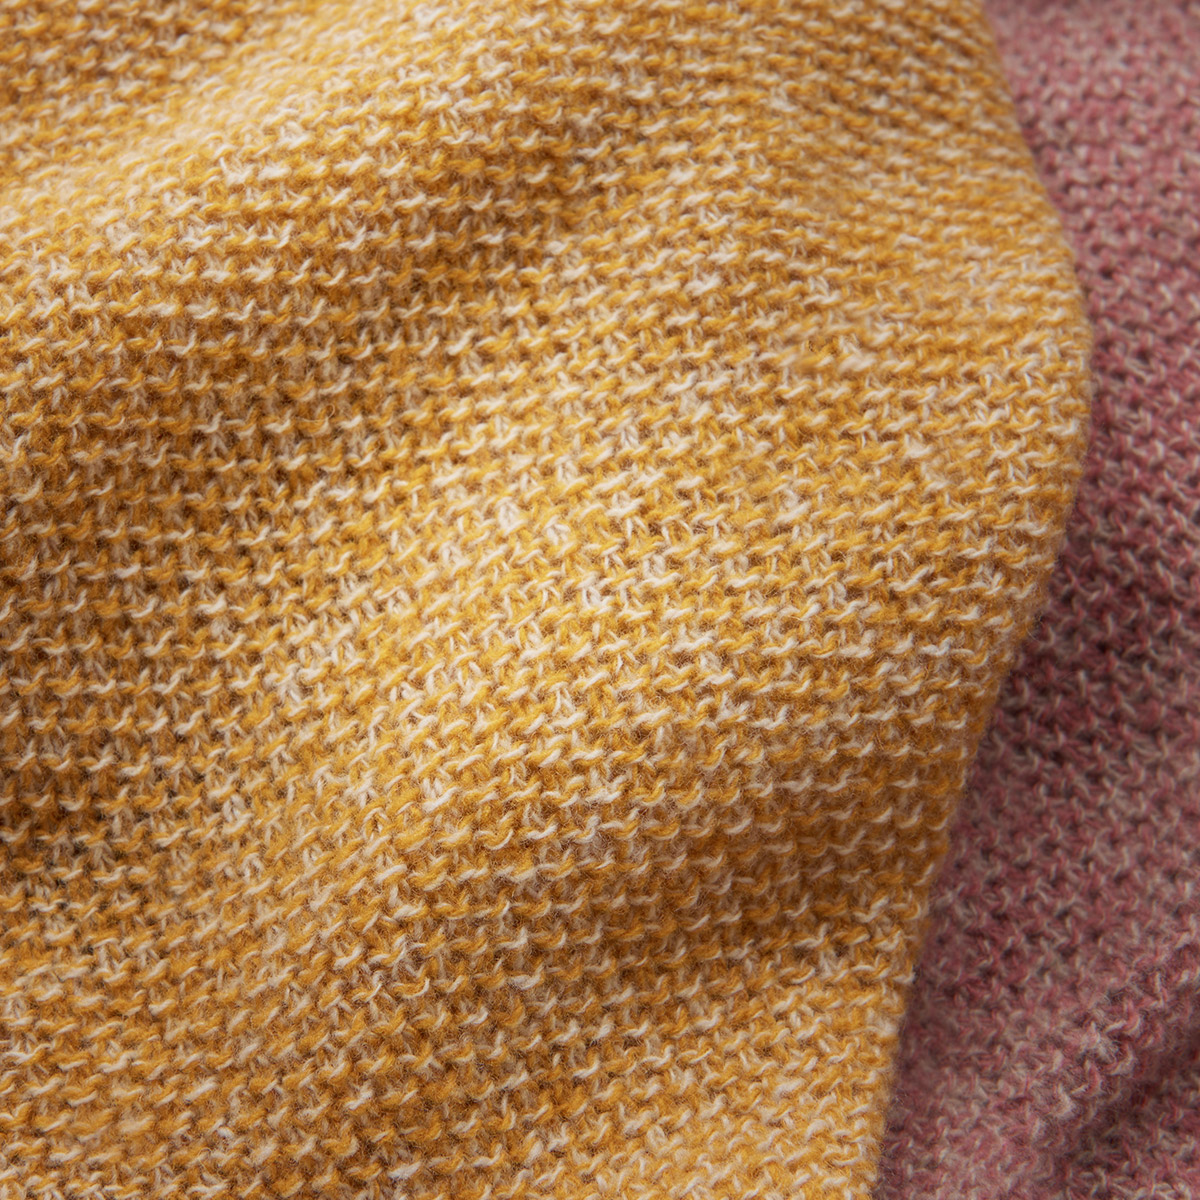 WOL wool blankets in amber and dusty rose